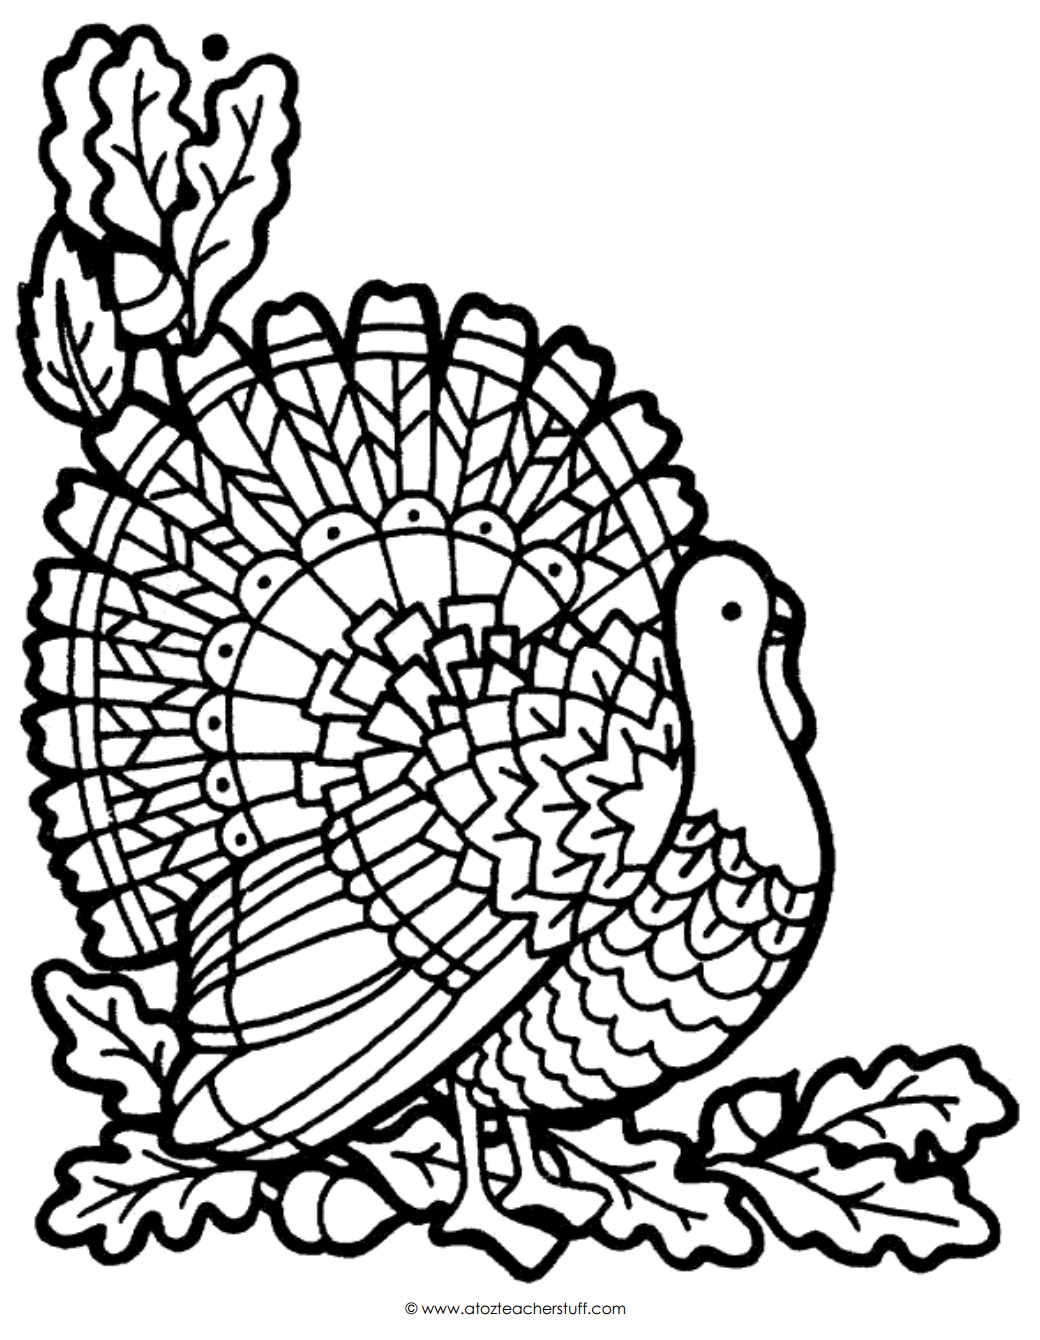 Printable Turkeys Coloring Pages
 Turkey Coloring Page